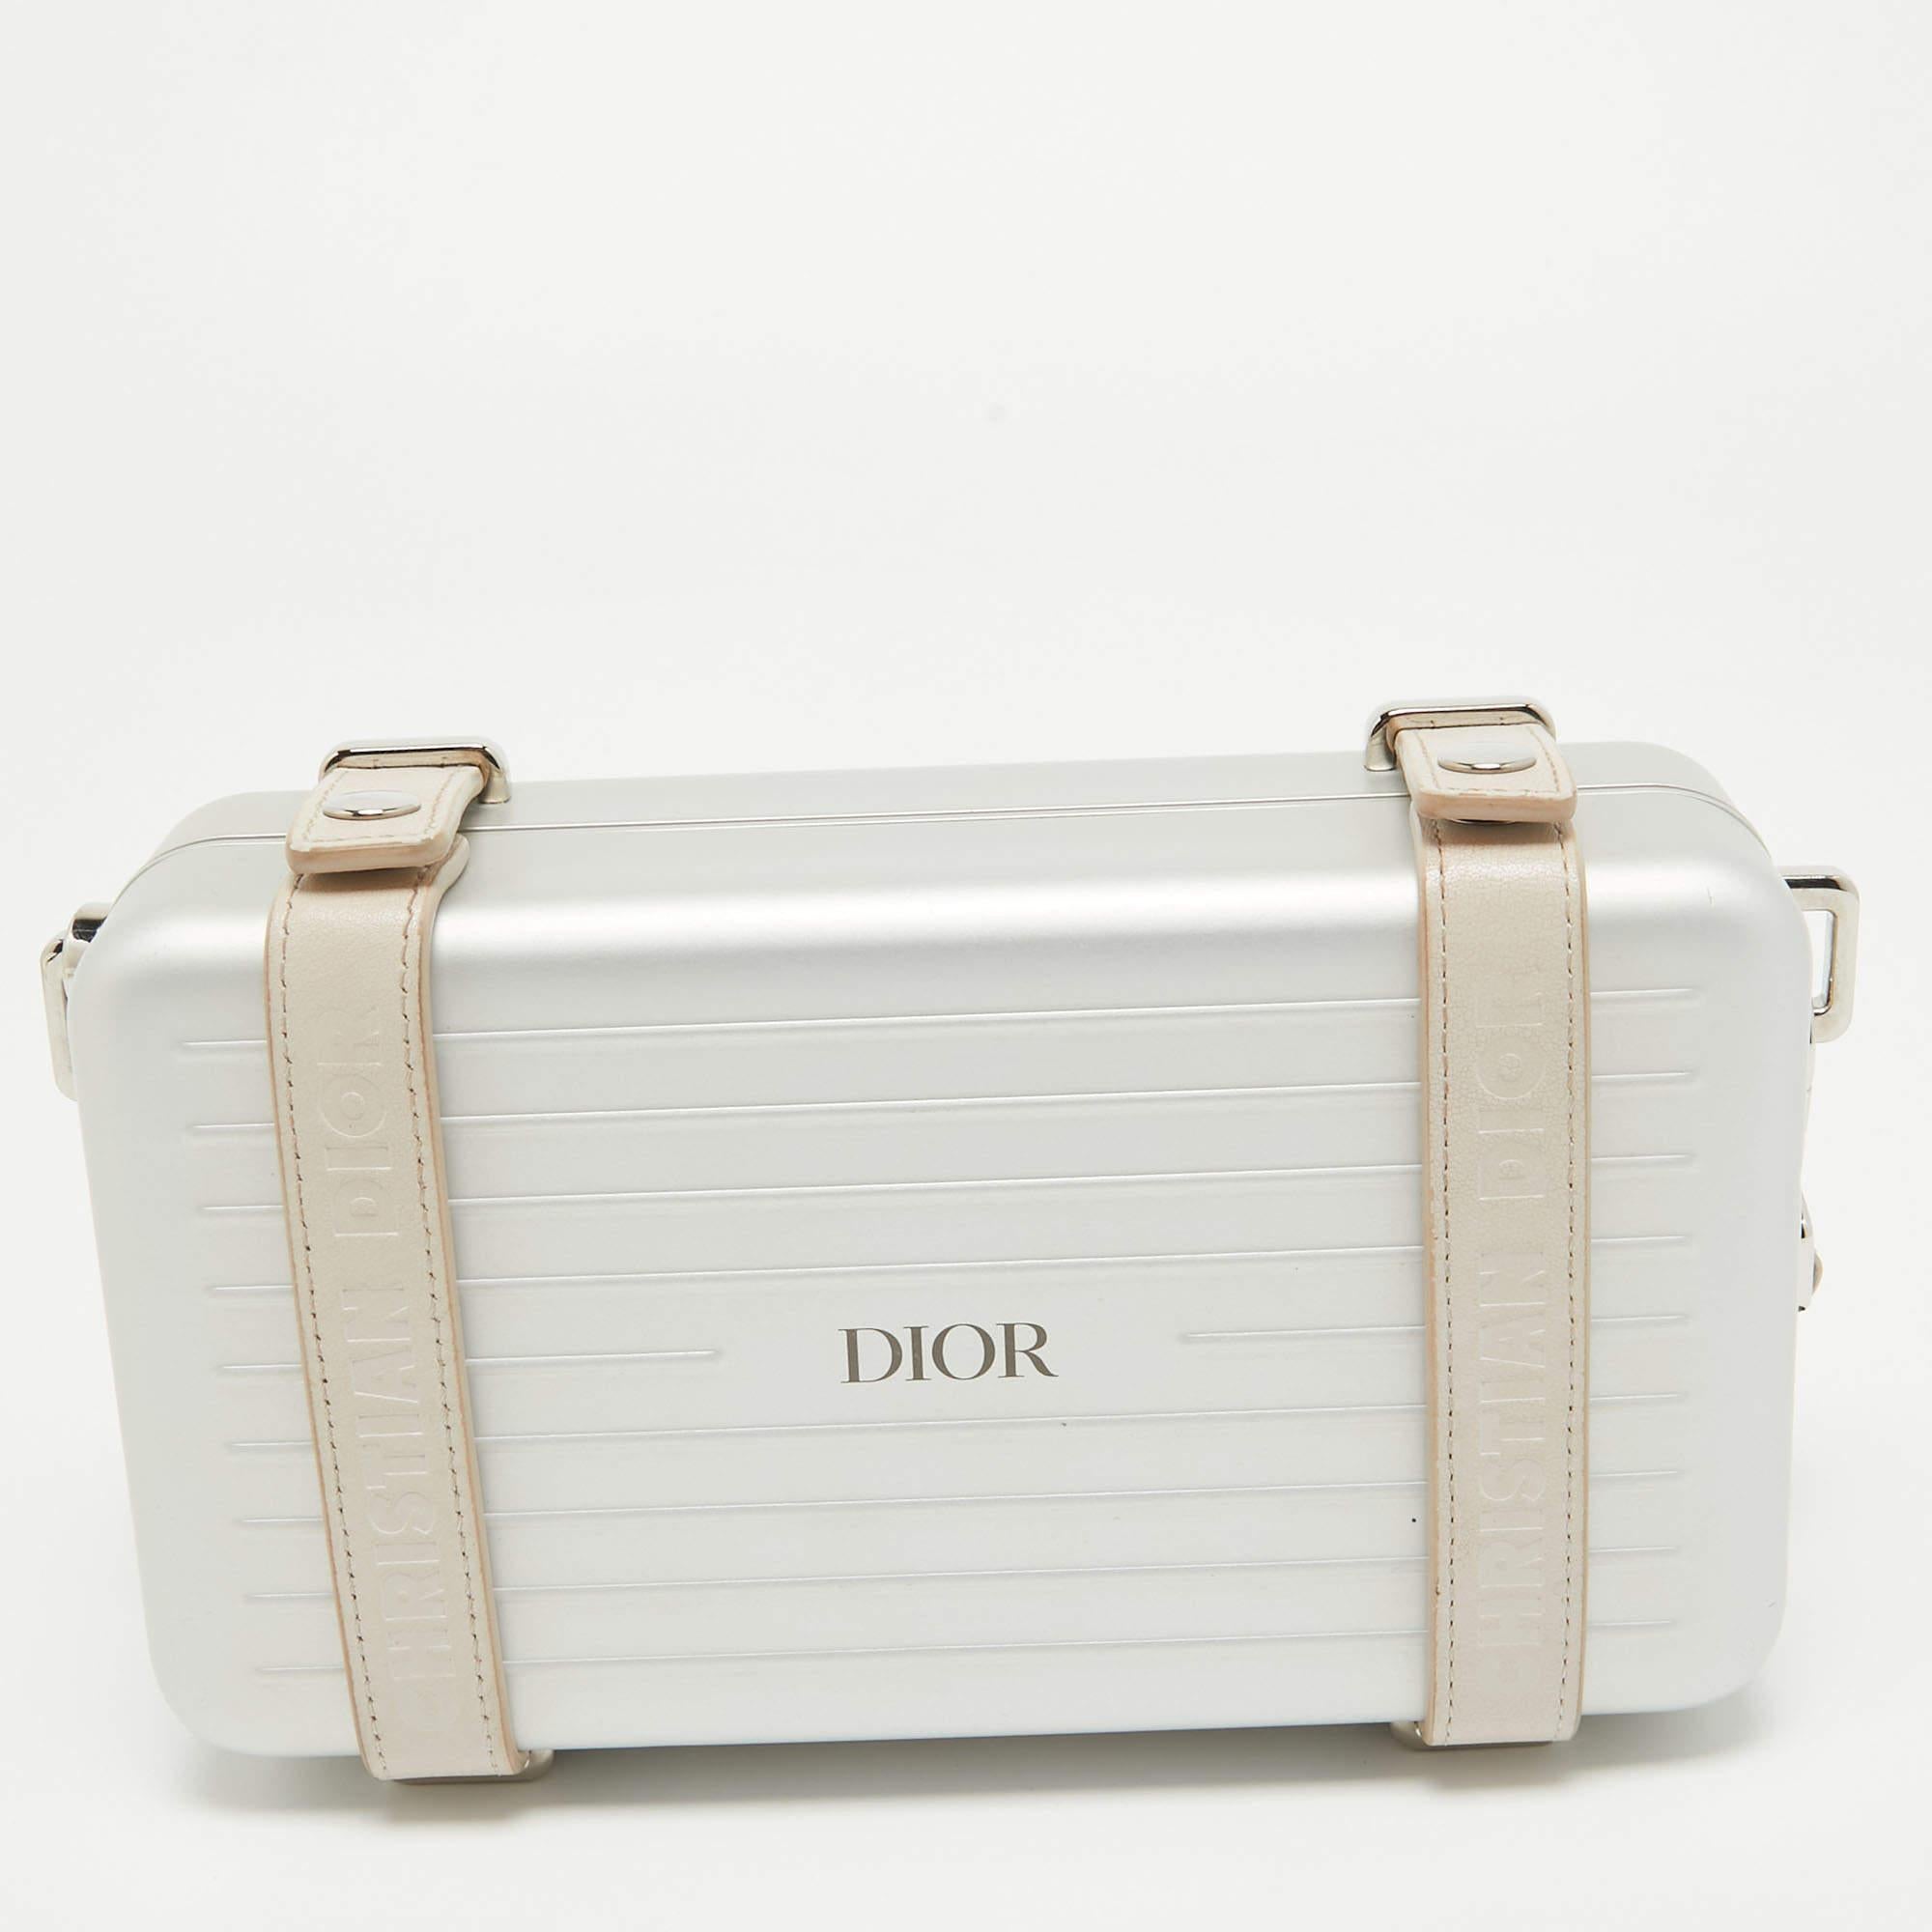 The personal clutch is from a special collaboration between DIOR and RIMOWA. Made from lightweight aluminum, the clutch has a compact size that makes it ideal to be carried by hand. The leather straps with snap fasteners secure the well-lined